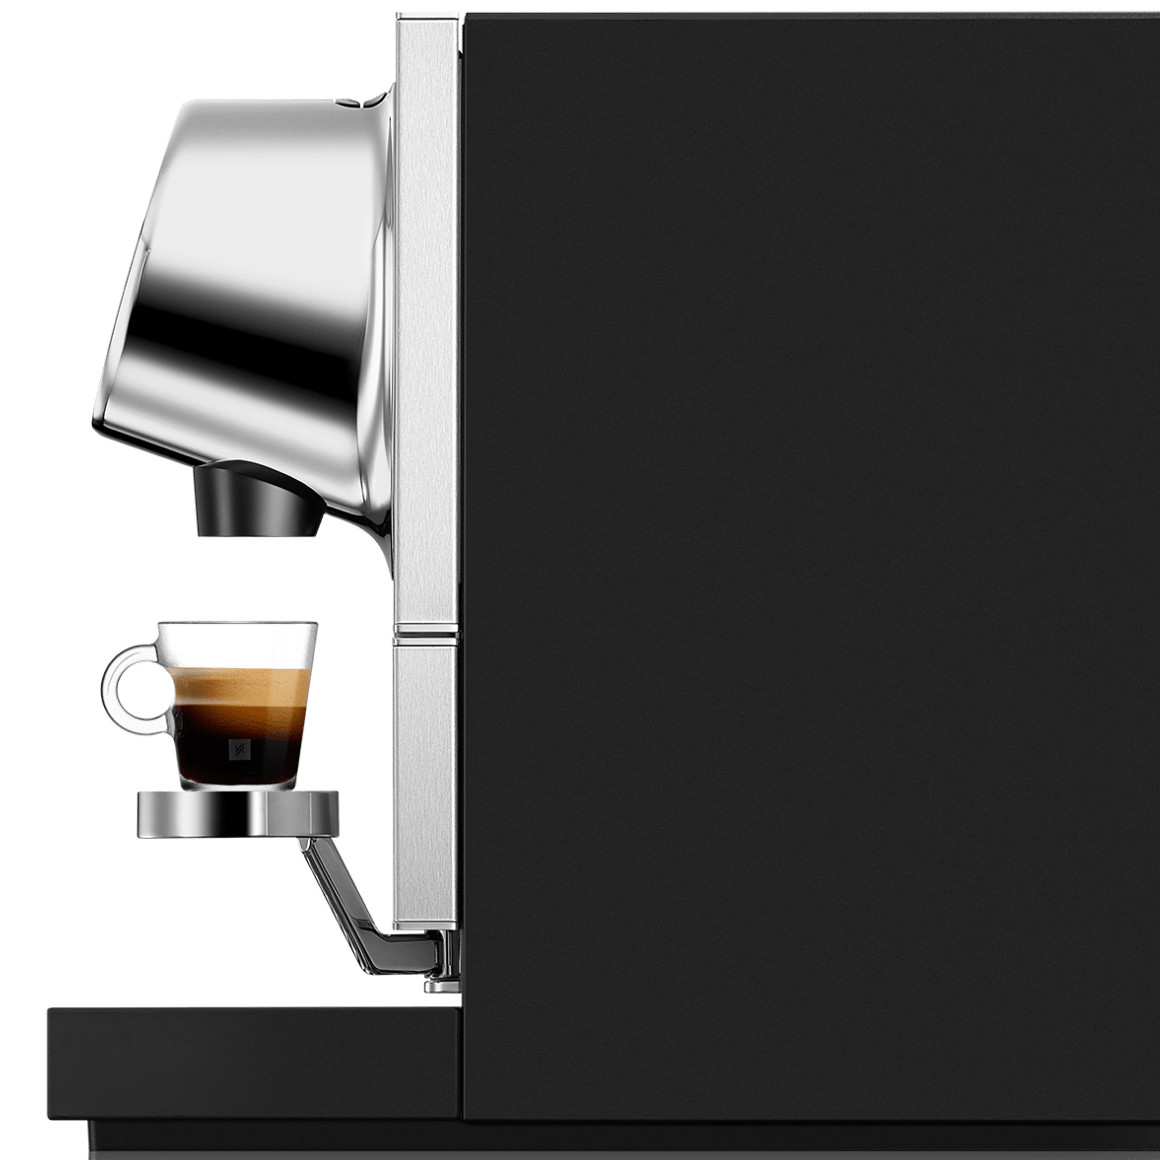 https://www.nespresso.com/shared_res/agility/global/machines/pro/machine-specifications/momento-coffee_left-side_espresso-view_d_2x.png